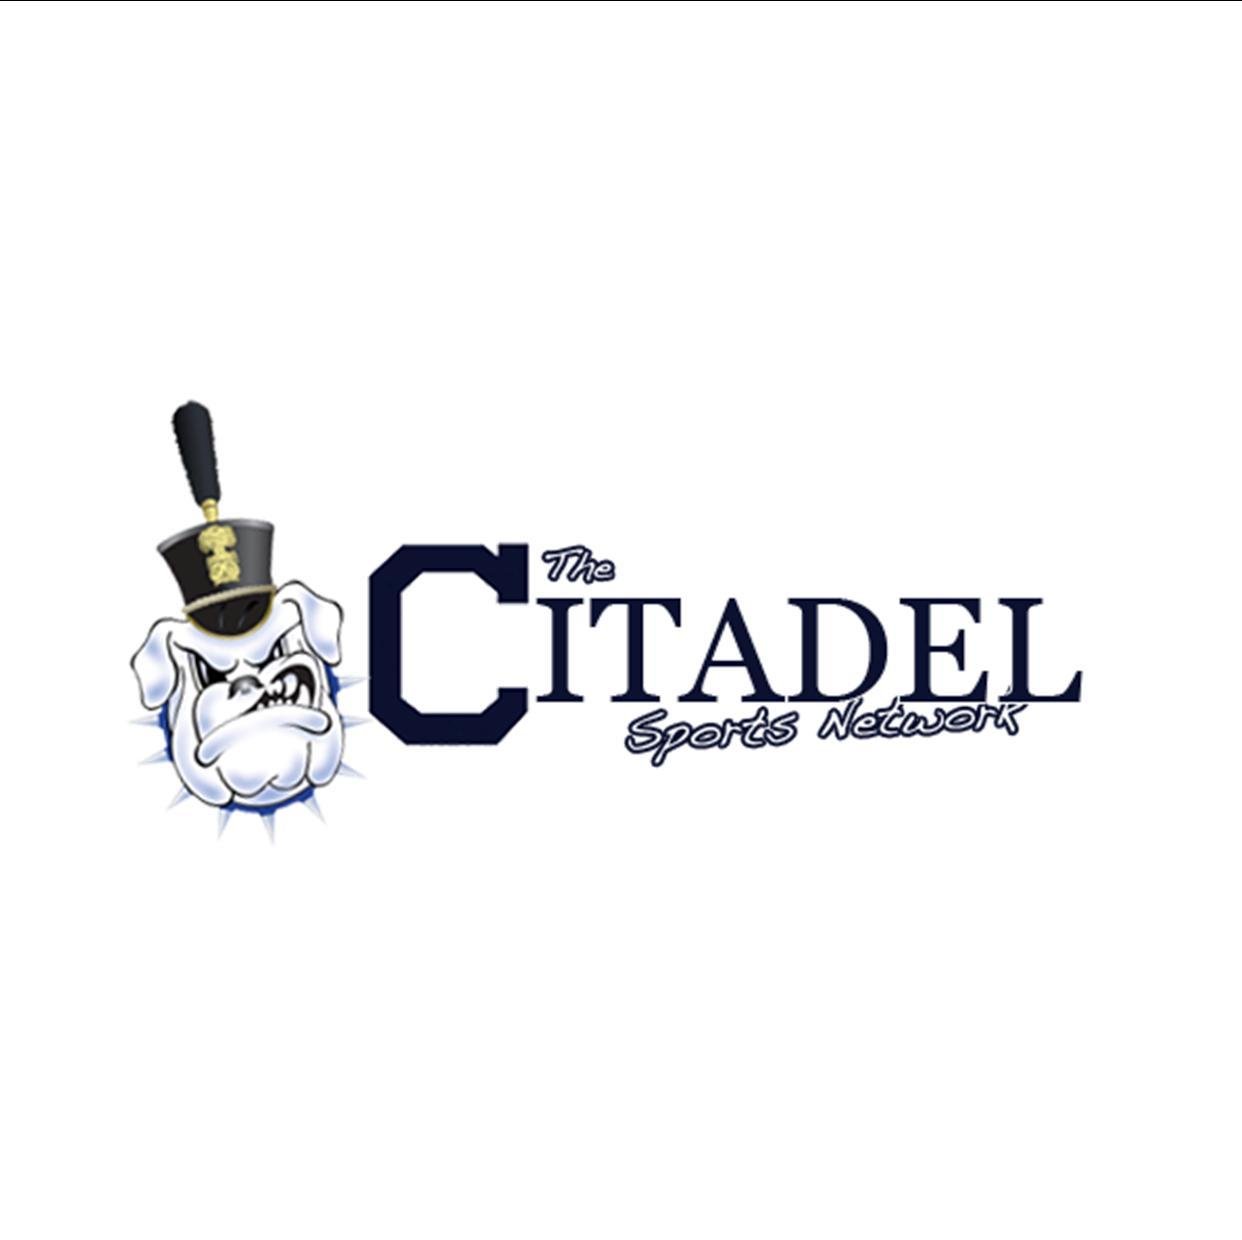 The exclusive radio broadcast network of @citadelsports for @Citadel1842 , The Military College of South Carolina.